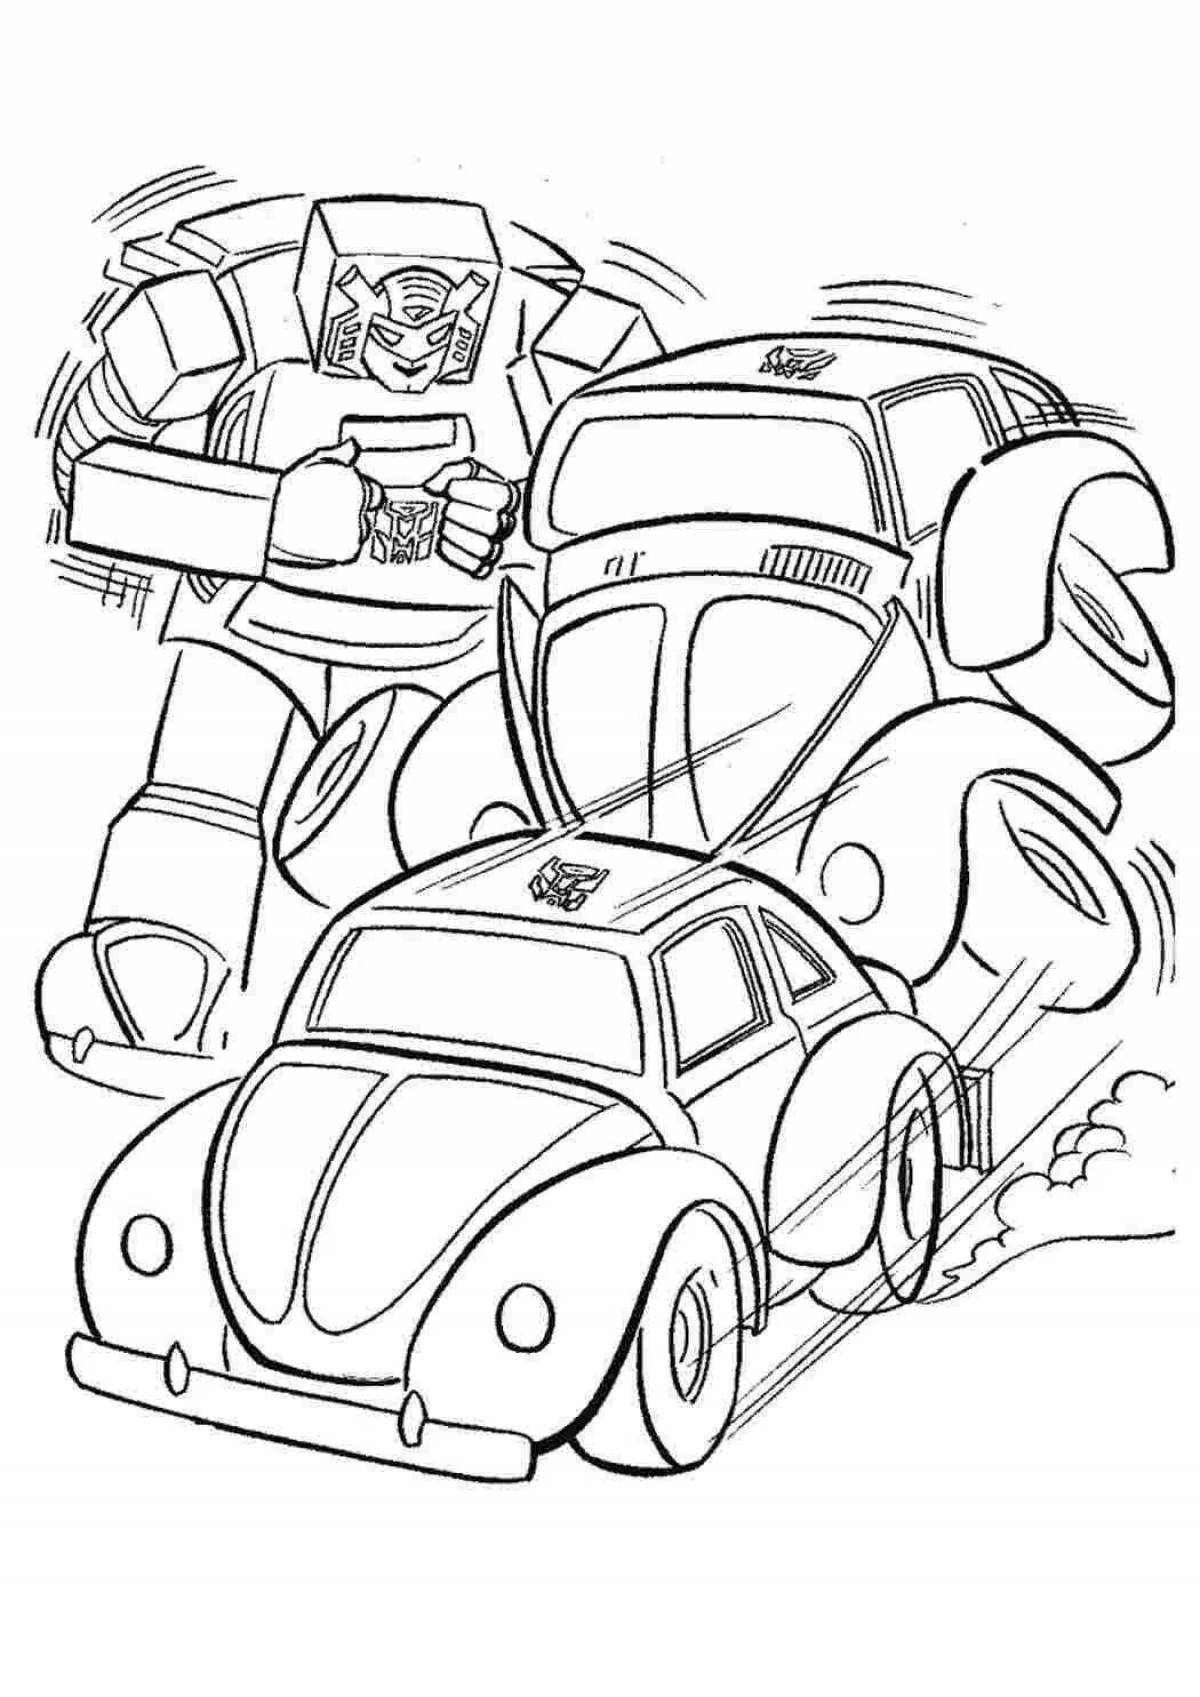 Playful Transforming Robot Coloring Page for Boys